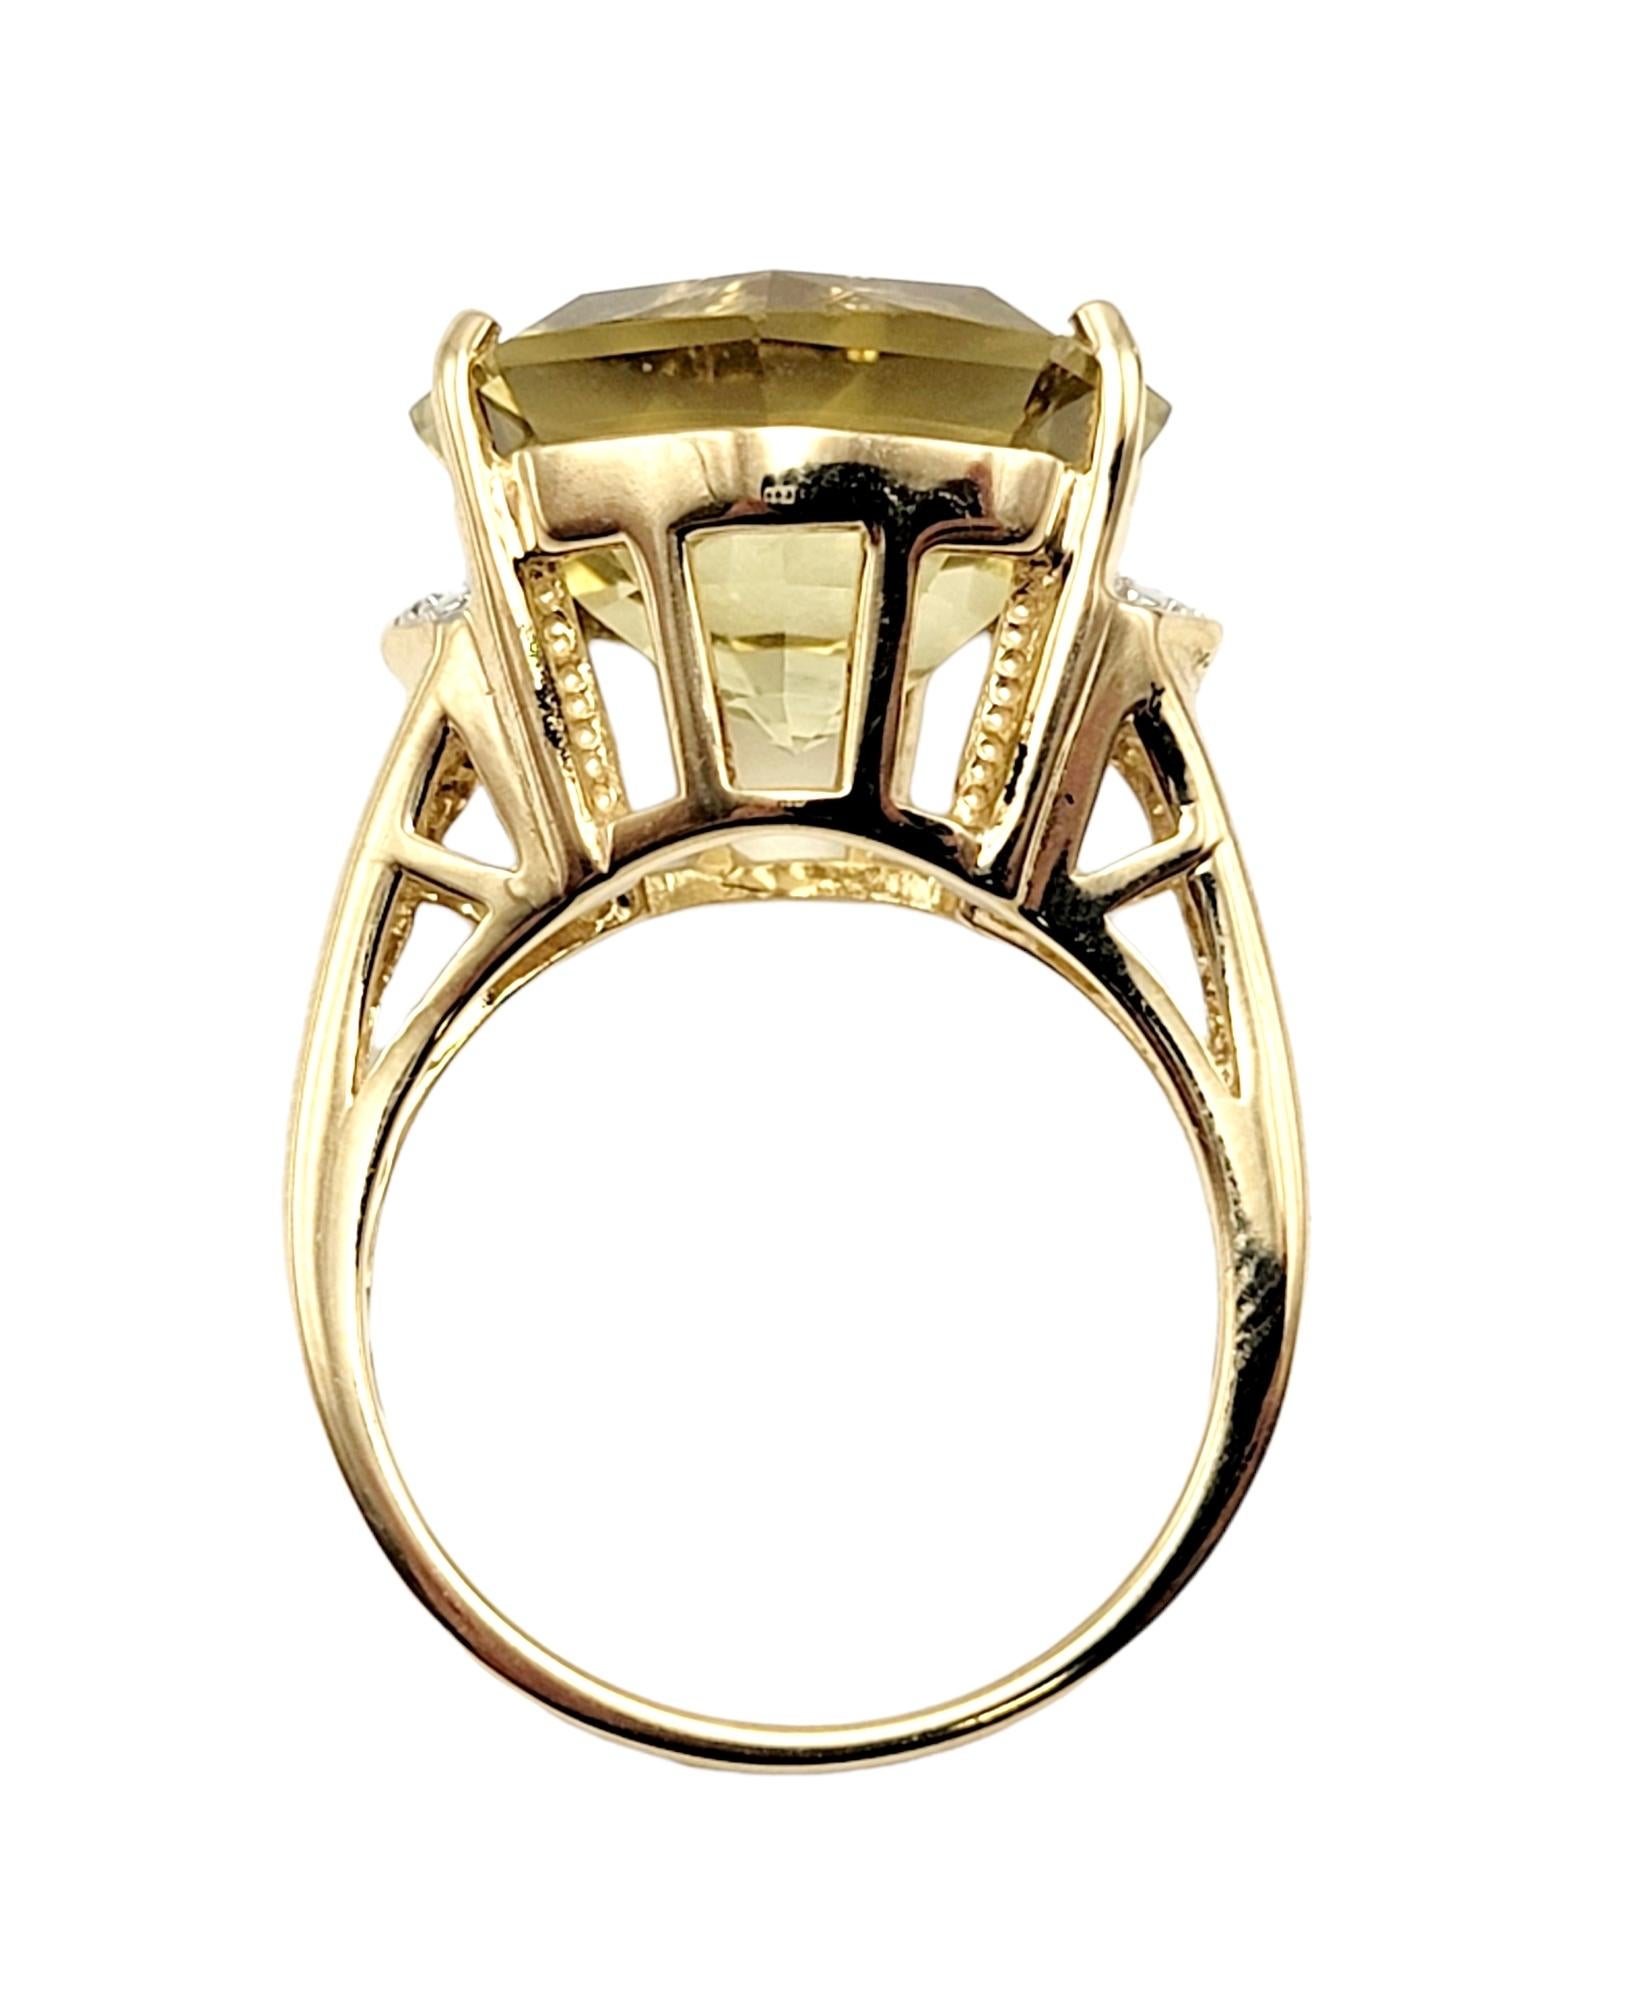 Contemporary 11.55 Carat Octagonal Cut Citrine Solitaire Cocktail Ring with Diamond Accents For Sale